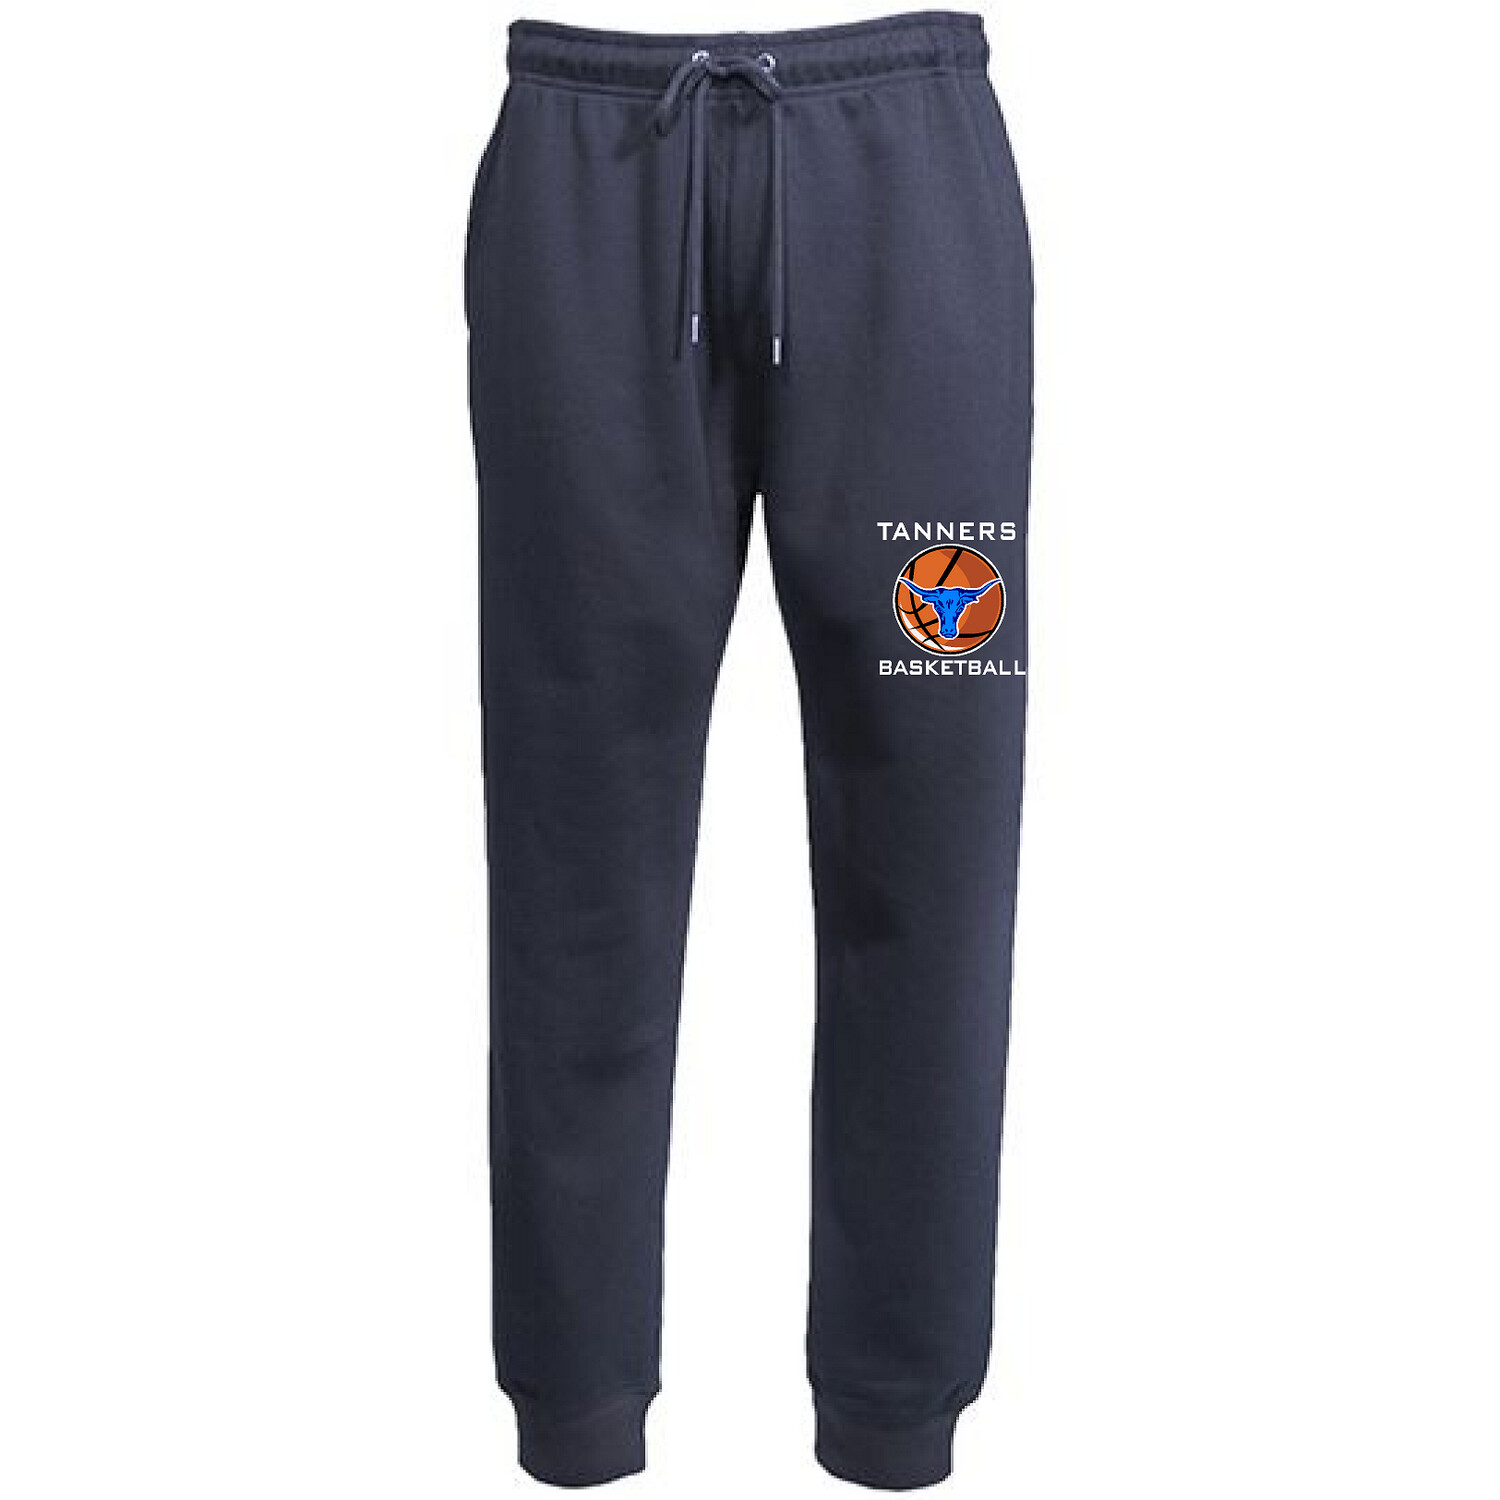 Embroidered Pennant Brand Peabody Basketball Jogger Sweatpants W/ Pocket in Navy